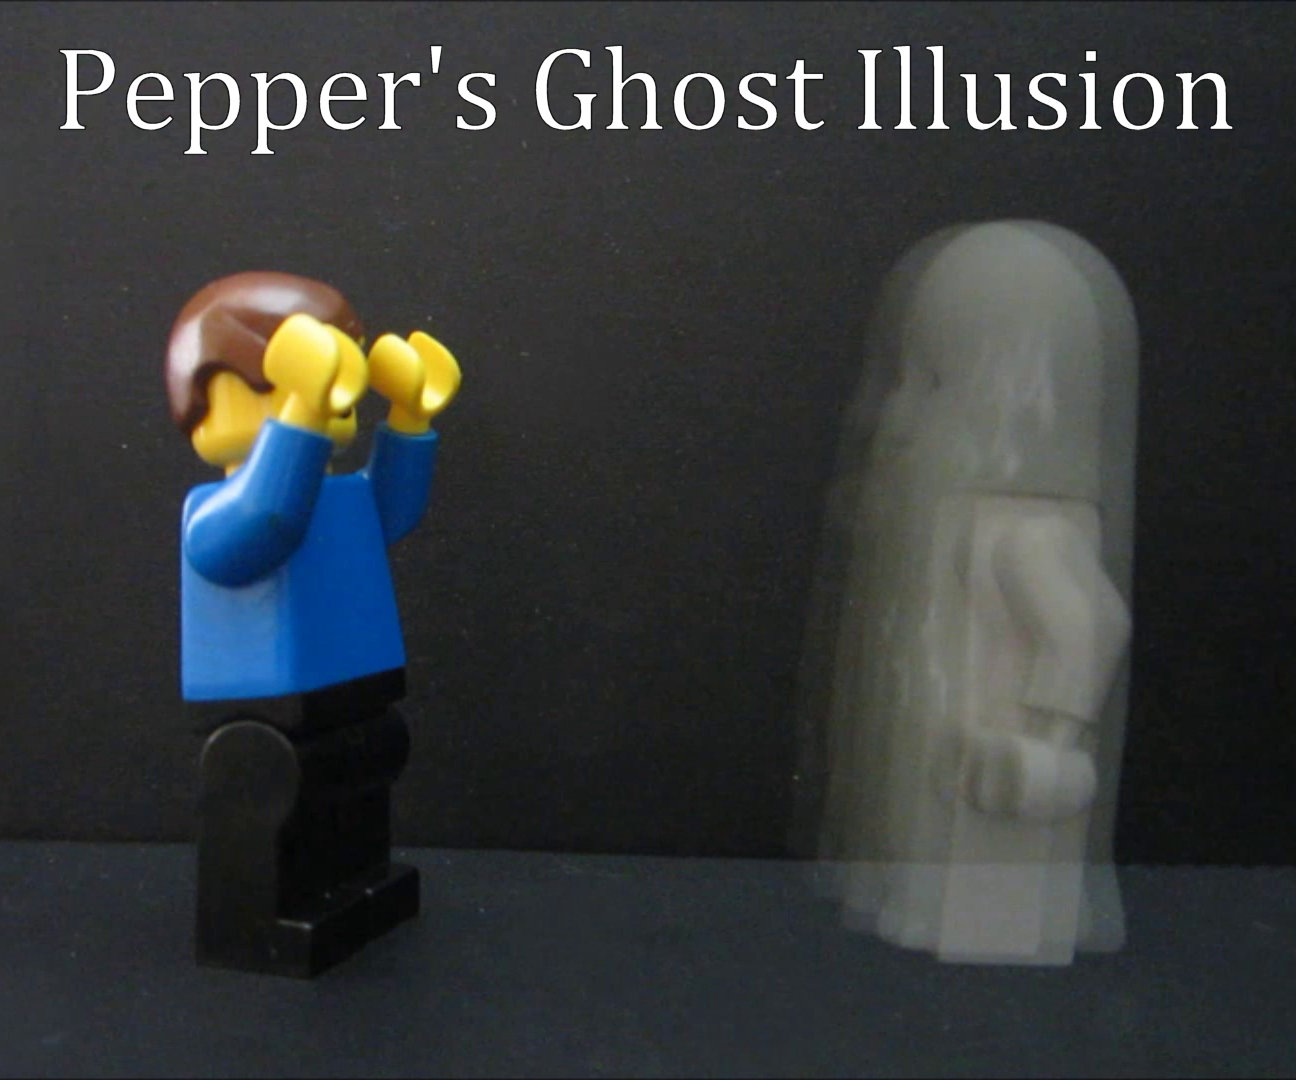 The Pepper's Ghost Illusion